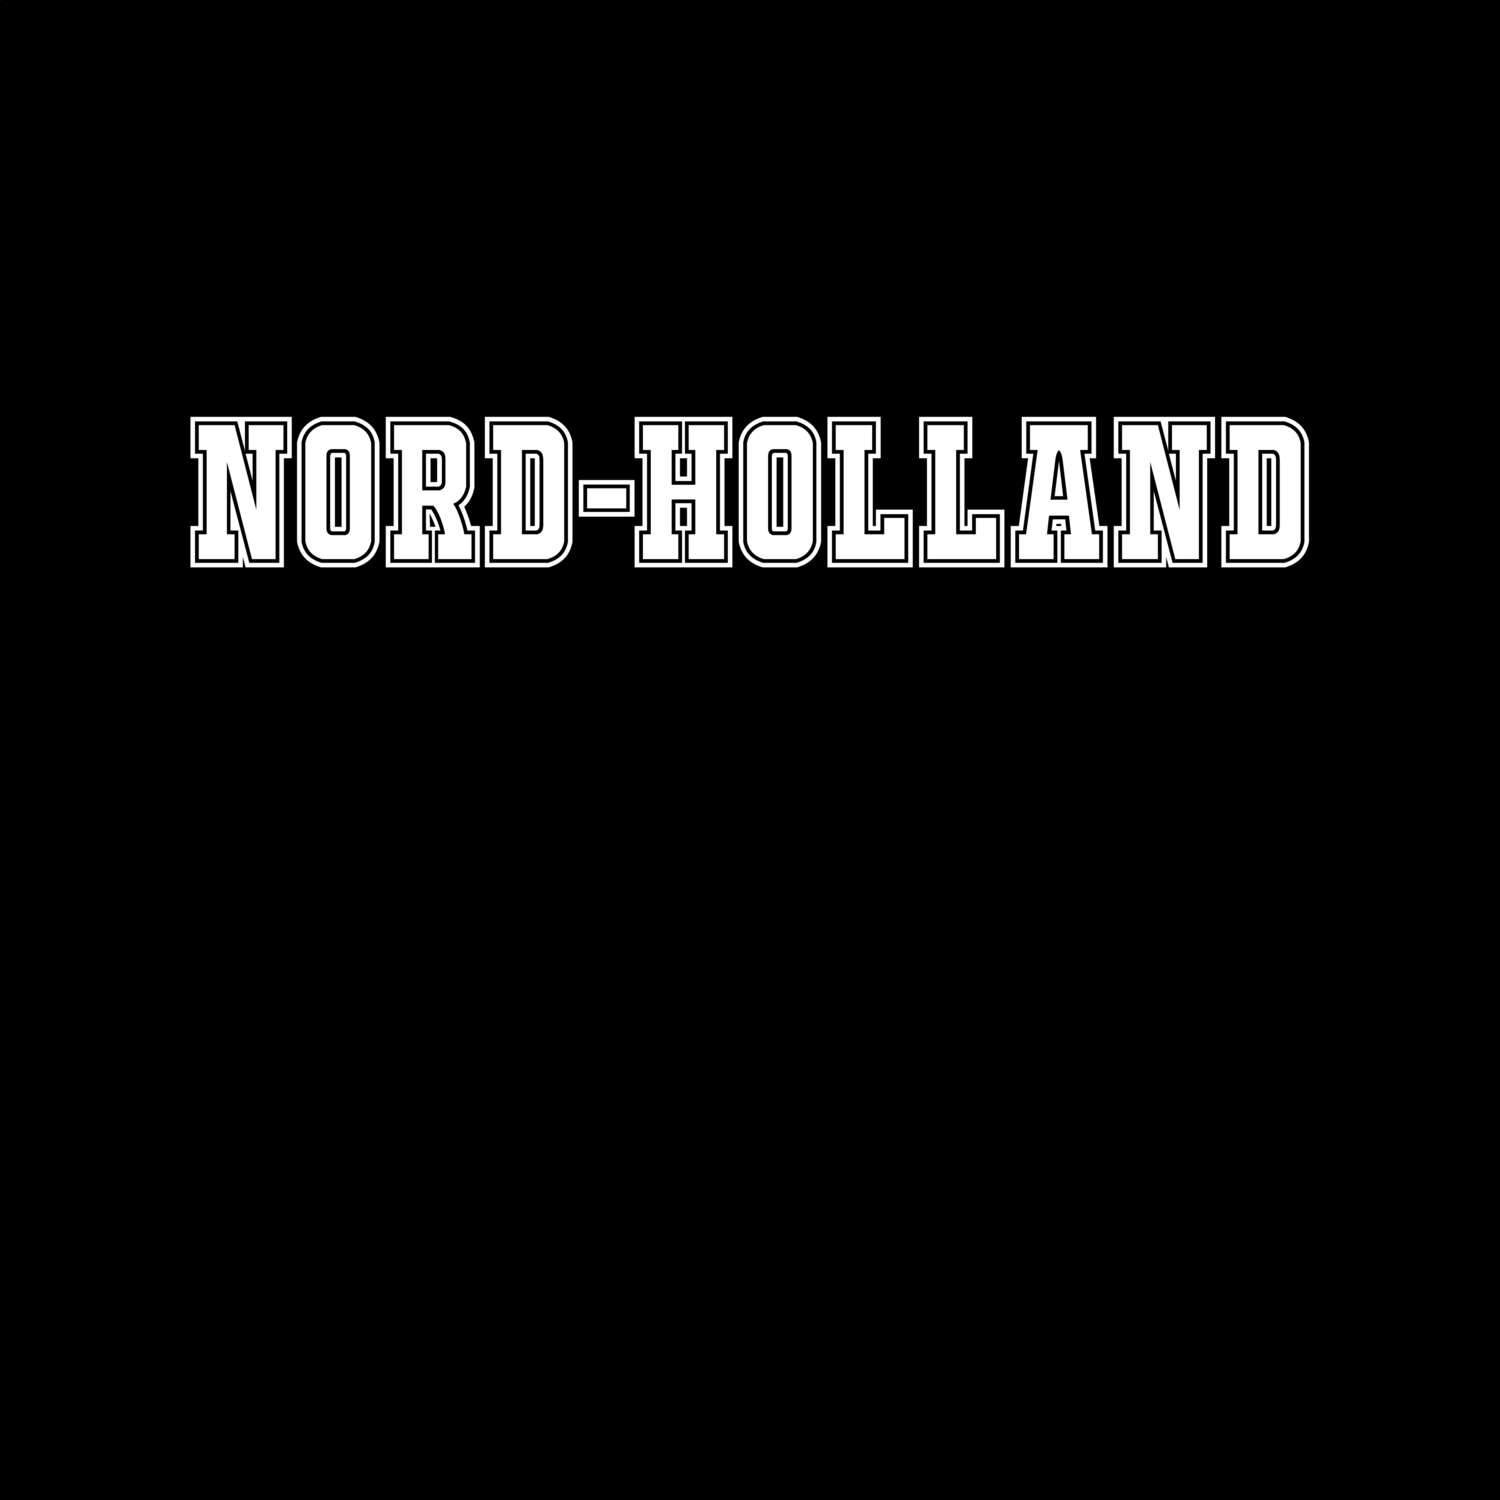 Nord-Holland T-Shirt »Classic«